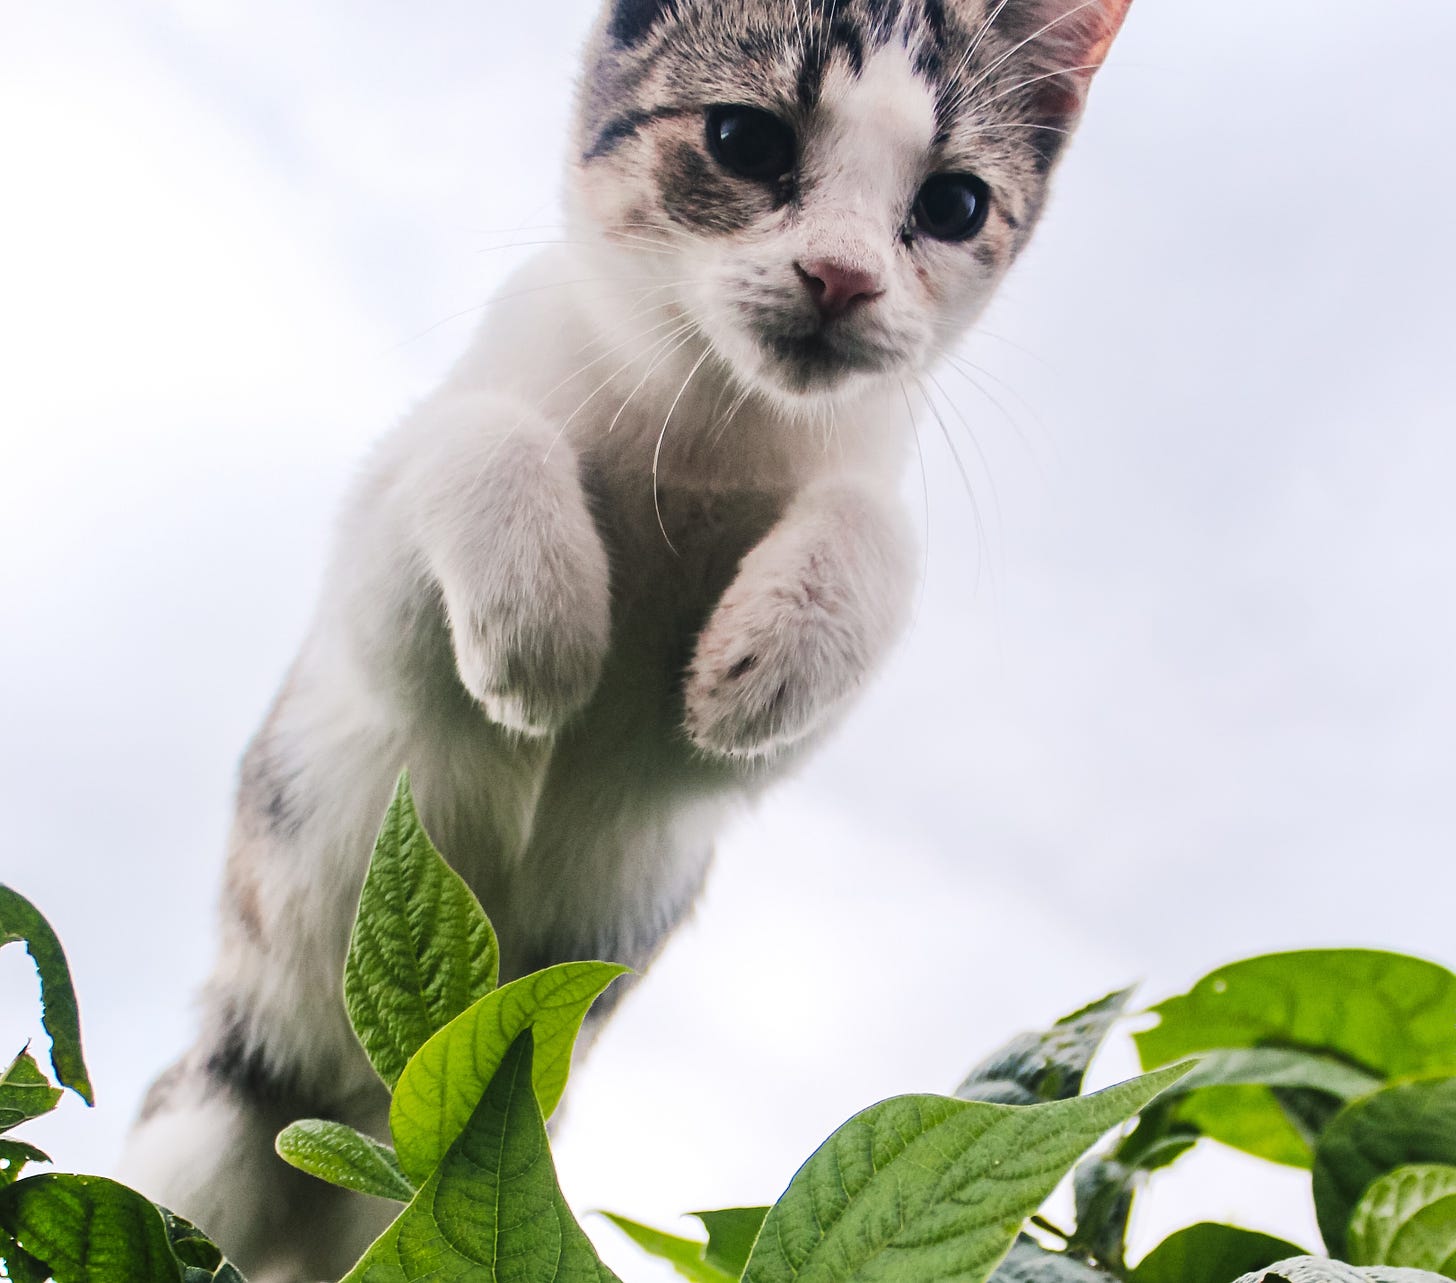 A grey and white cat with mostly white fur leaping over leaves outdoors